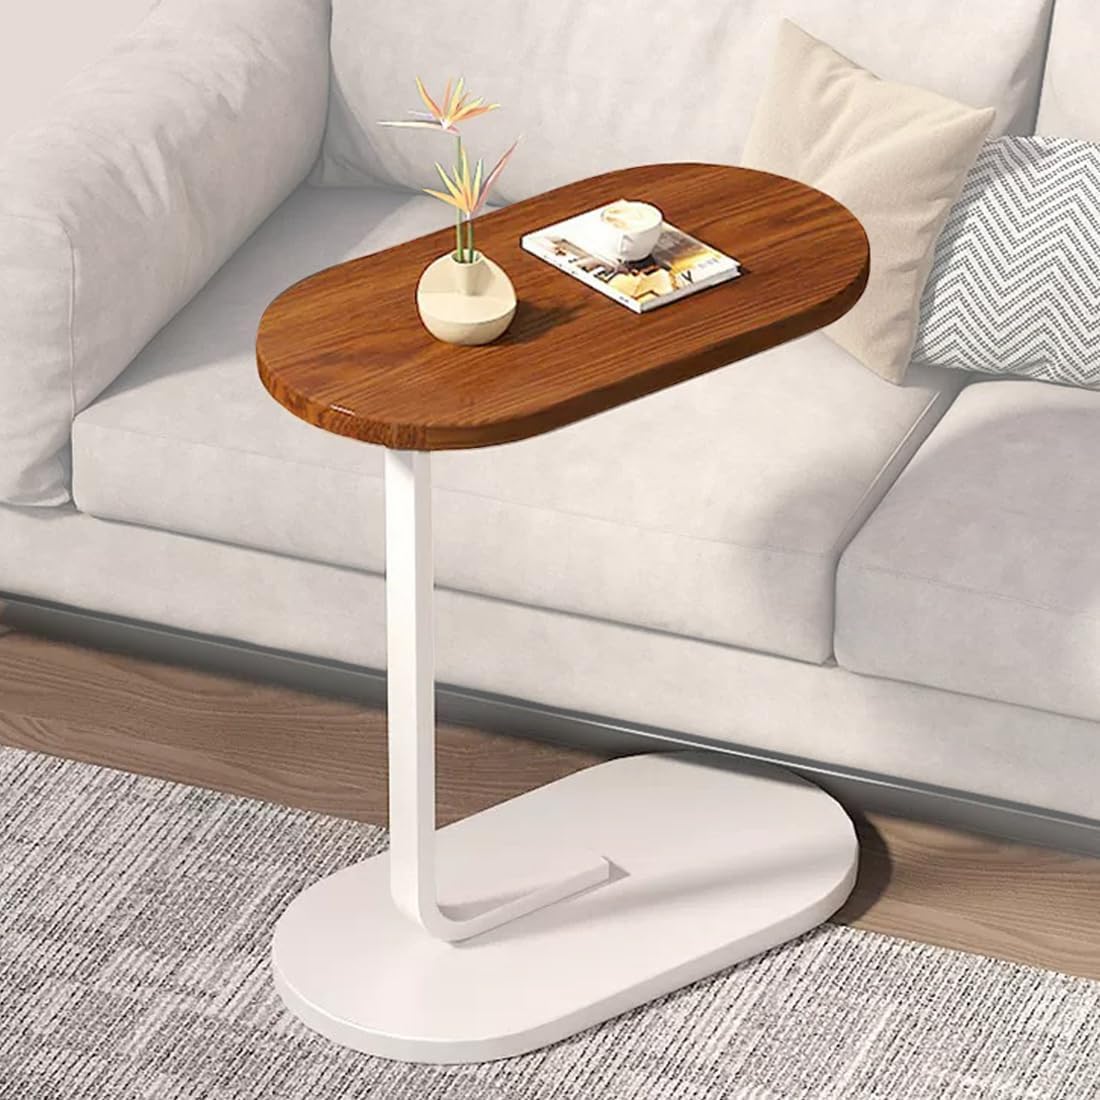 Sofa and Bed Side Table, C Shaped End table Small Coffee Table for Small Spaces